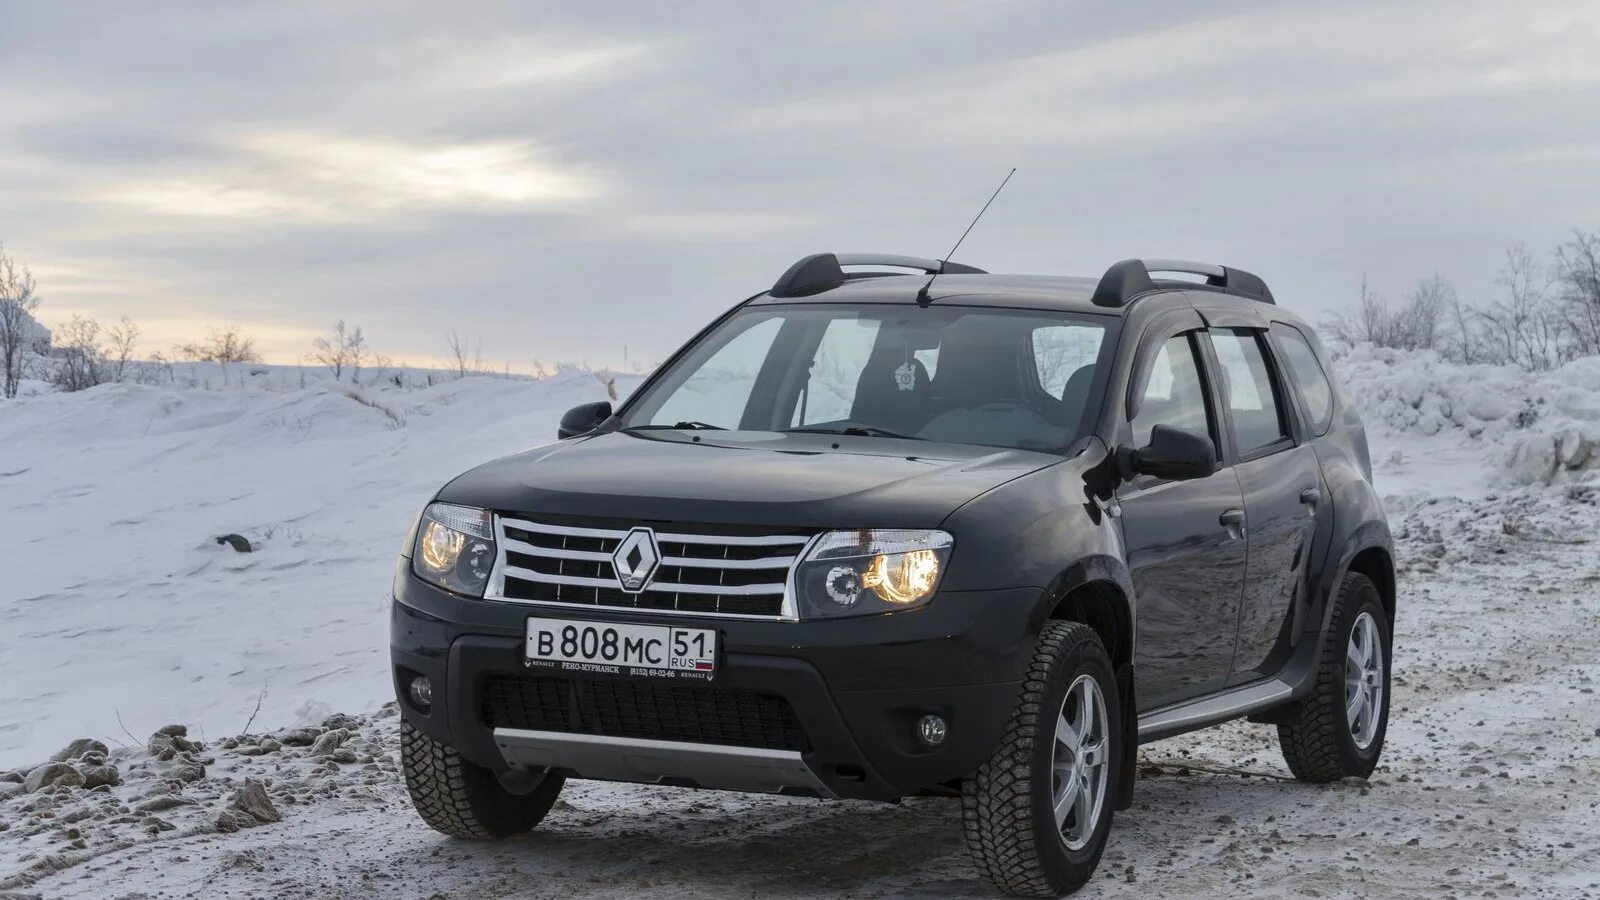 Renault duster 2014 год. Рено Дастер 4х4. Рено Дастер 2.0 4х4. Renault Duster 4. Рено Дастер 2014 2.0 4х4.